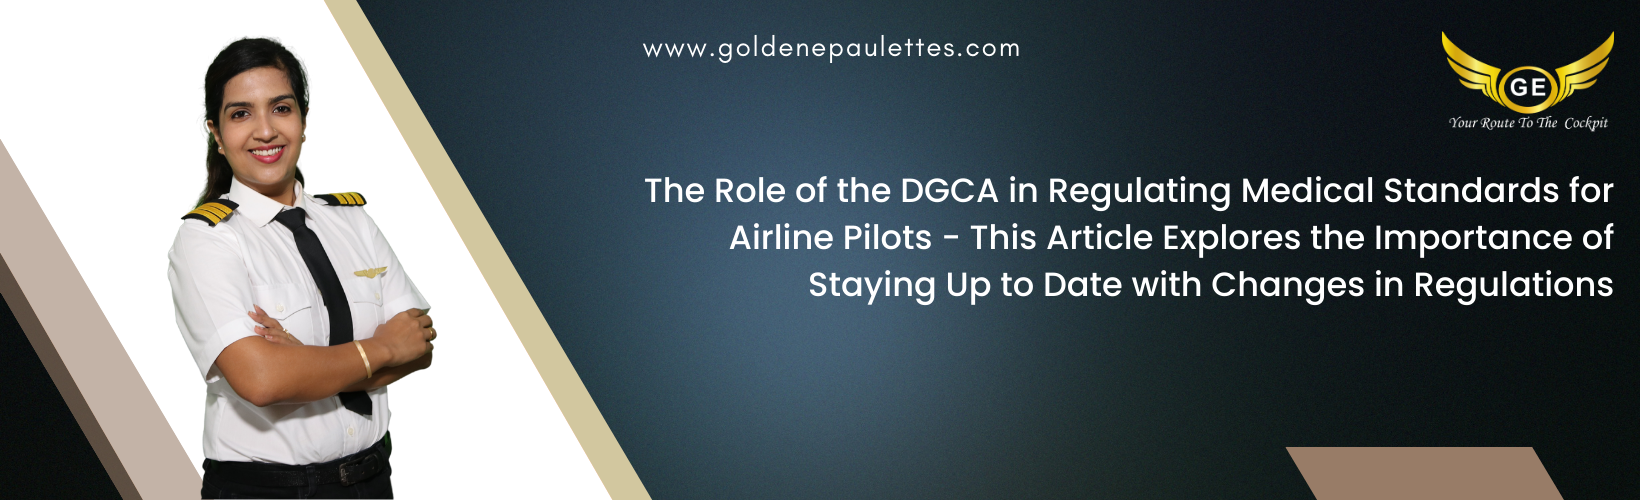 The Role of the DGCA in Regulating the Medical Standards for Pilots - This article will discuss the role of the DGCA in regulating the medical standards for pilots. It will also explain the importance of staying up to date with changes in the regulations. (Reference